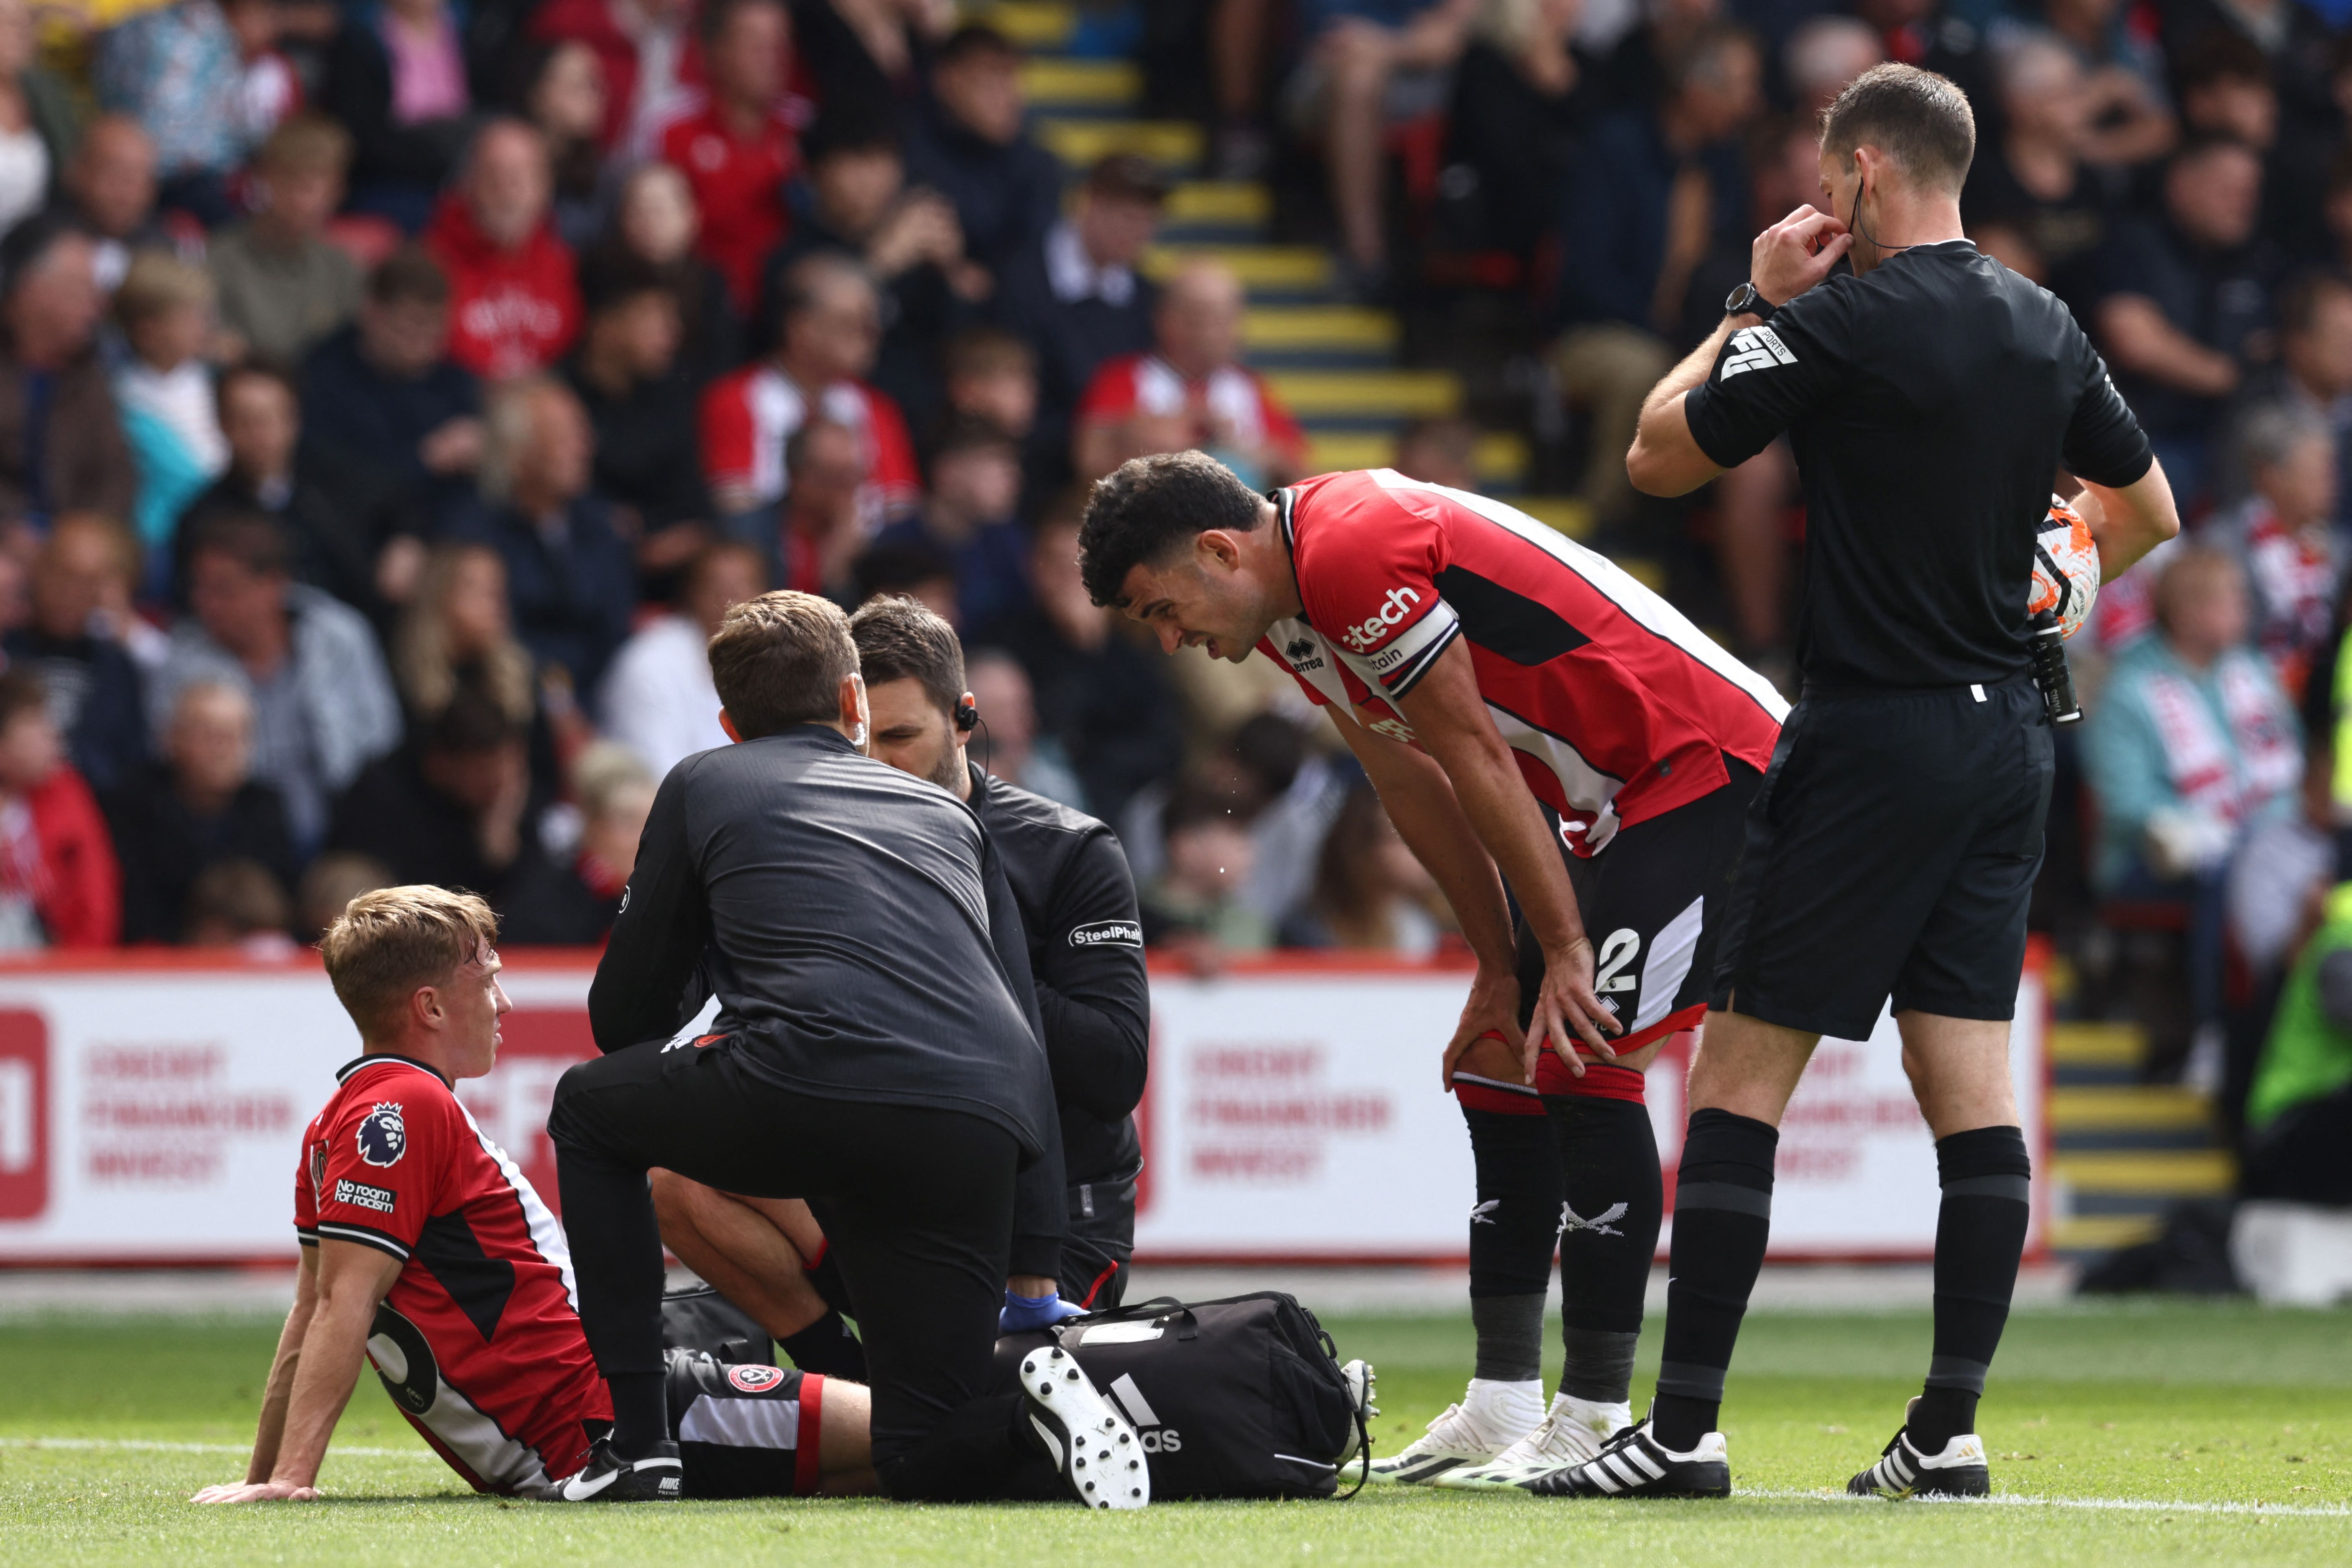 Tottenham fans pile in as Sheffield United manager and players